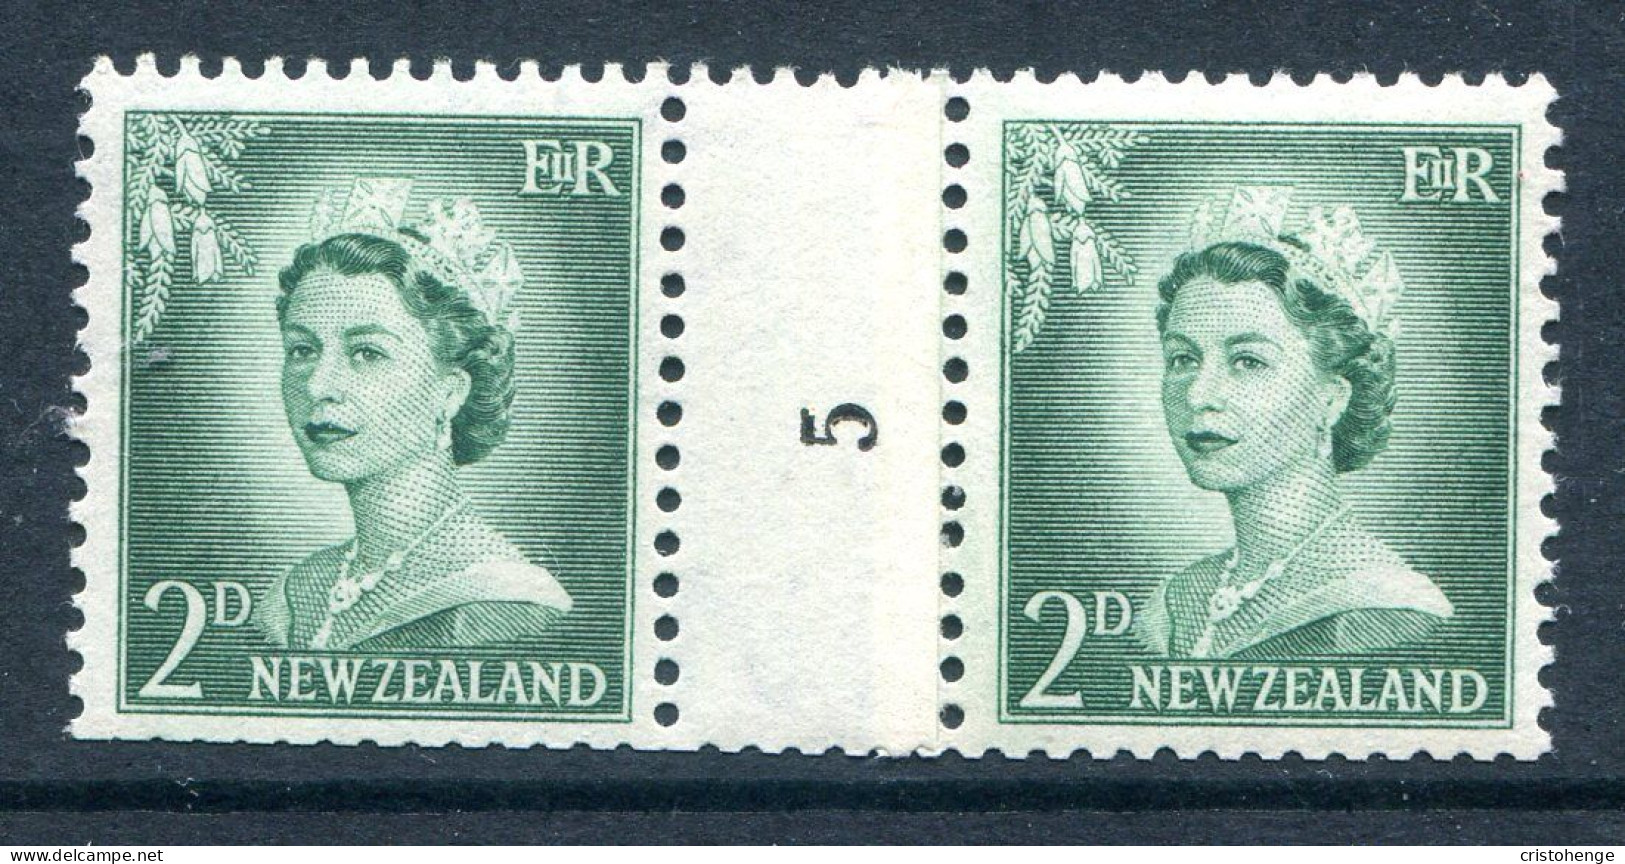 New Zealand 1955-59 QEII Large Figure Definitives - Coil Pairs - 2d Bluish-green - No. 5 - LHM - Unused Stamps